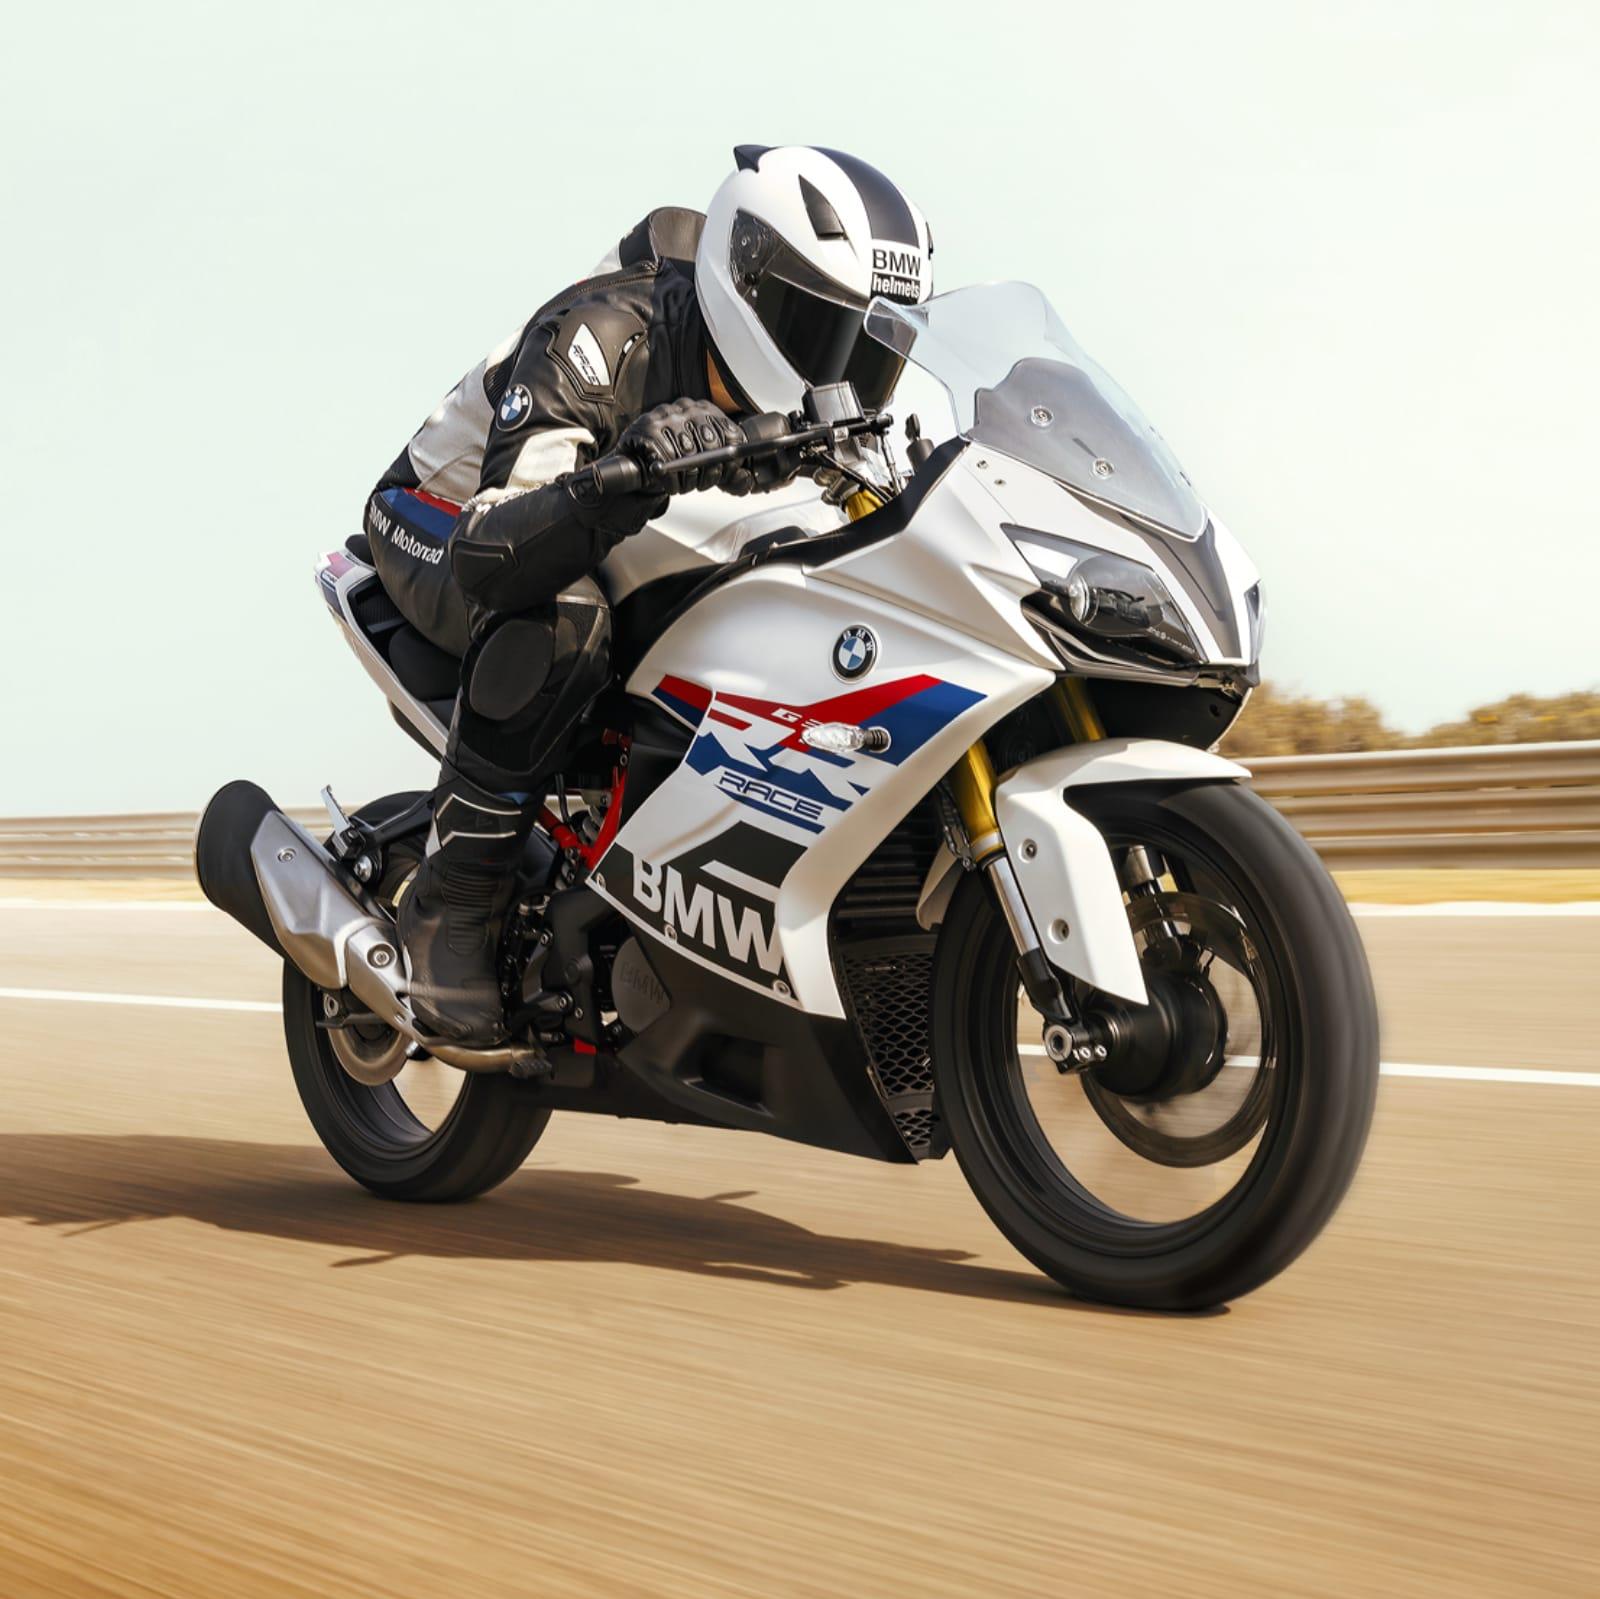 Bmw G Rr Launched In India At Rs Lakh News18